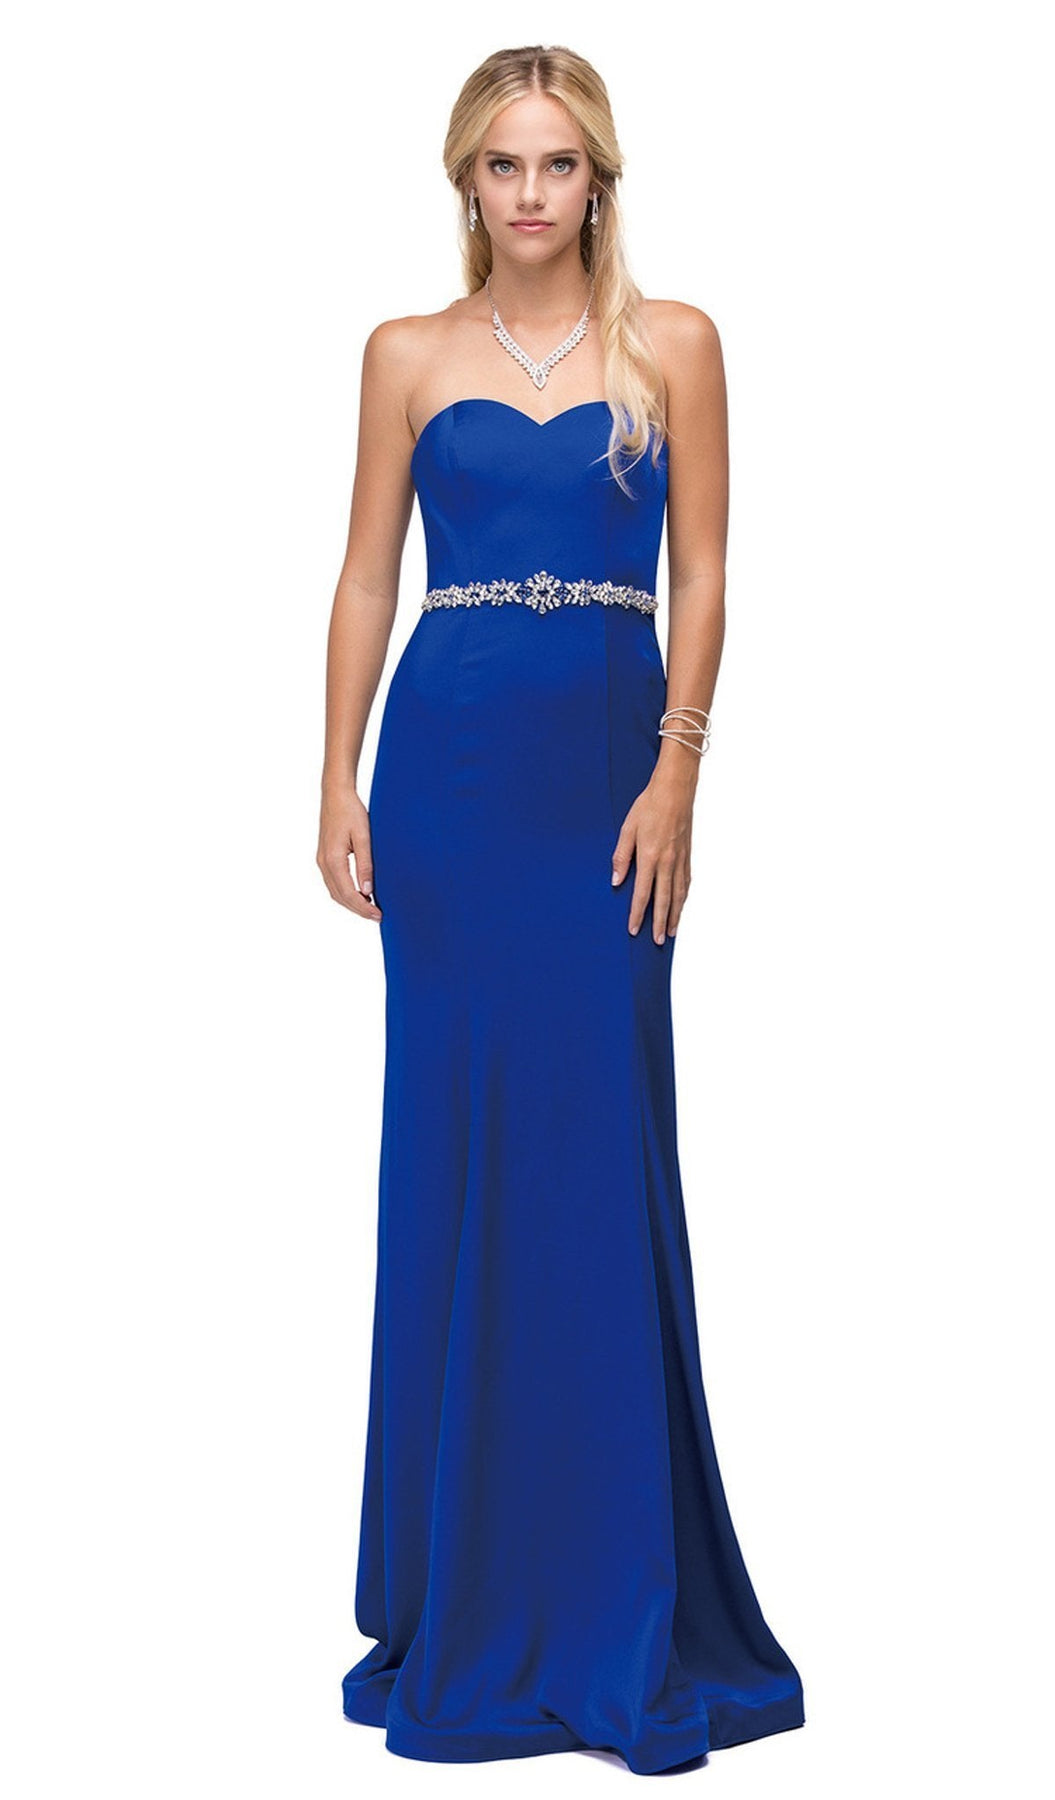 Dancing Queen - 9720 Strapless Sweetheart Beaded Jersey Prom Dress Special Occasion Dress XS / Royal Blue